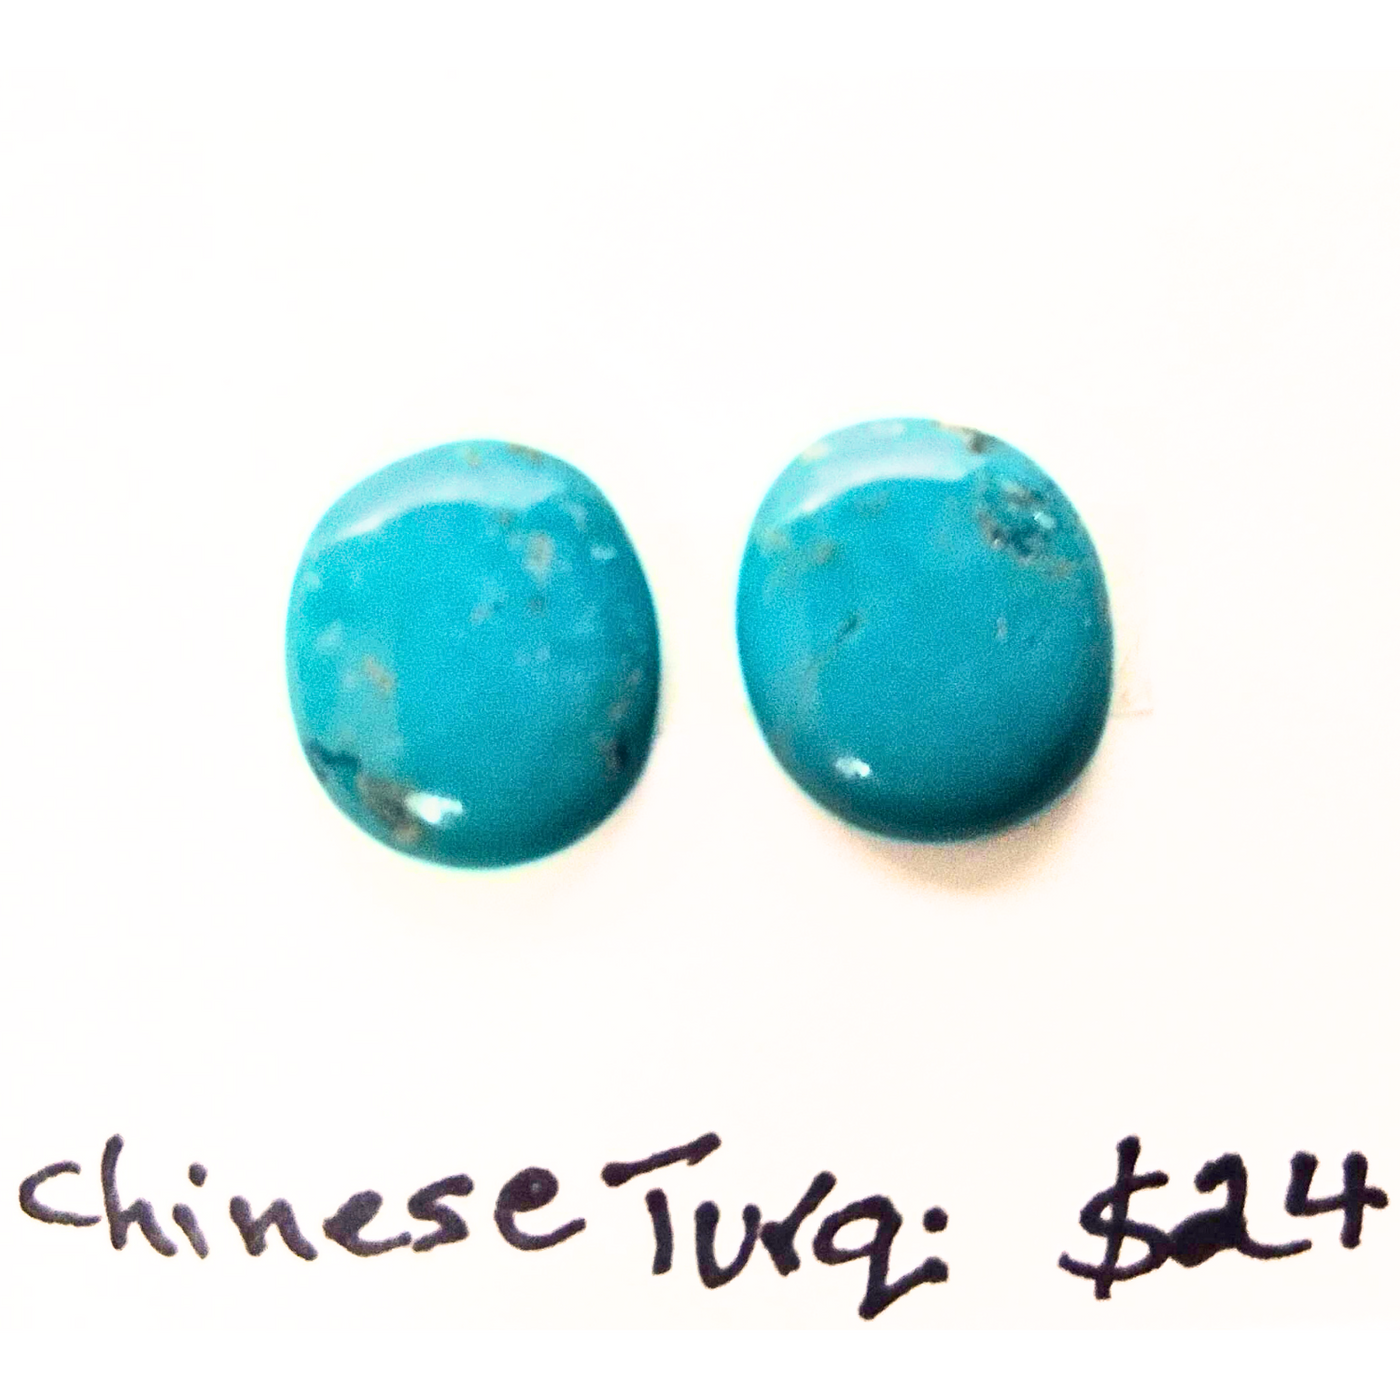 CTQ-1002 Chinese Turquoise Cabochon Pair